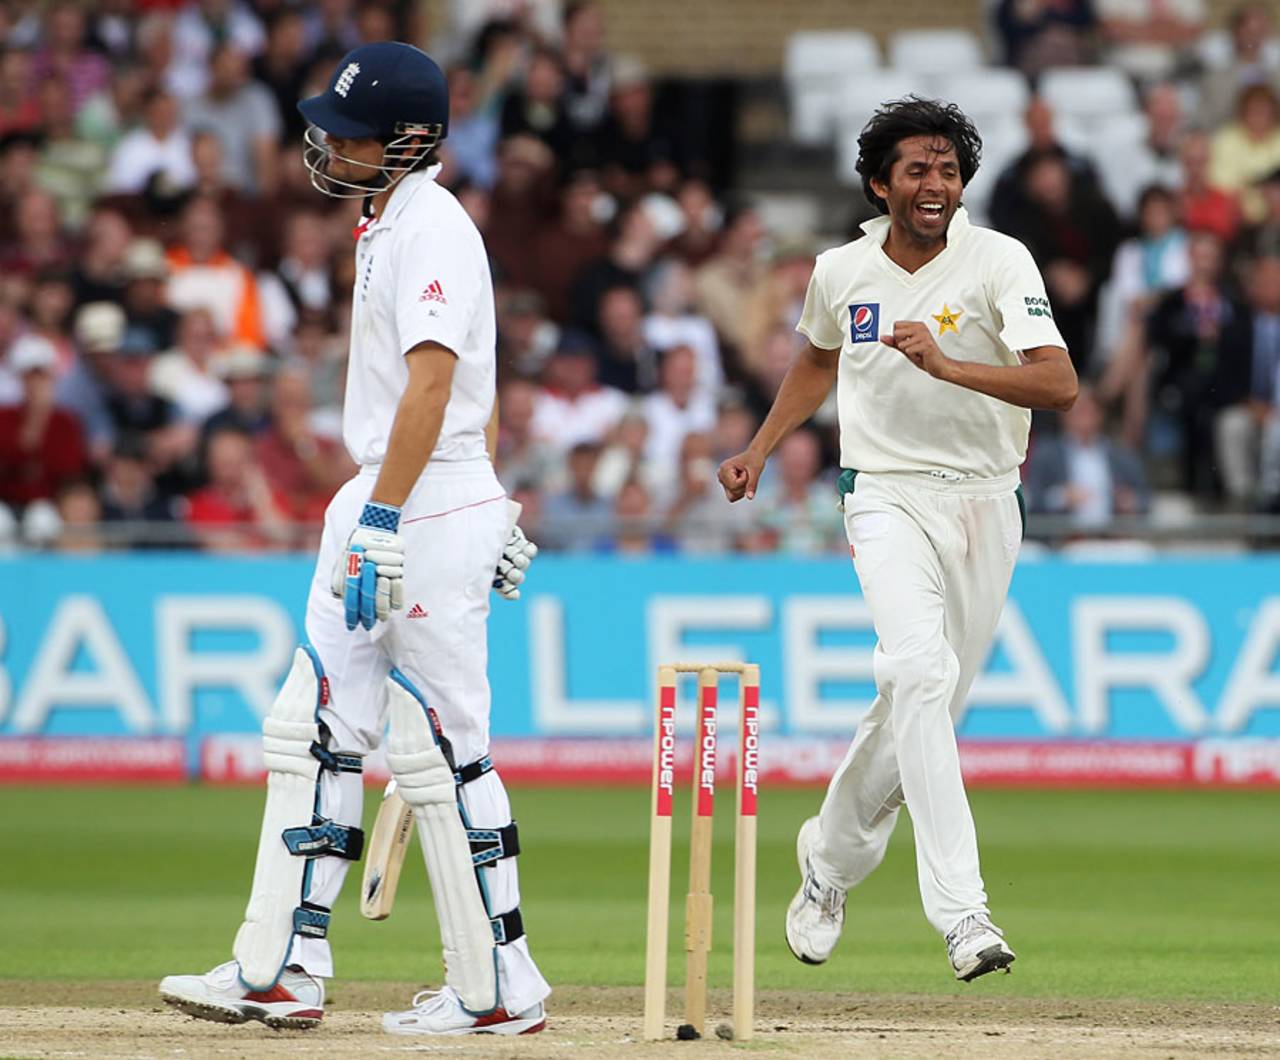 Mohammad Asif picked up his 100th Test wicket when he had Alastair Cook caught down the leg side, England v Pakistan, 1st Test, Trent Bridge, 2nd day, July 31, 2010